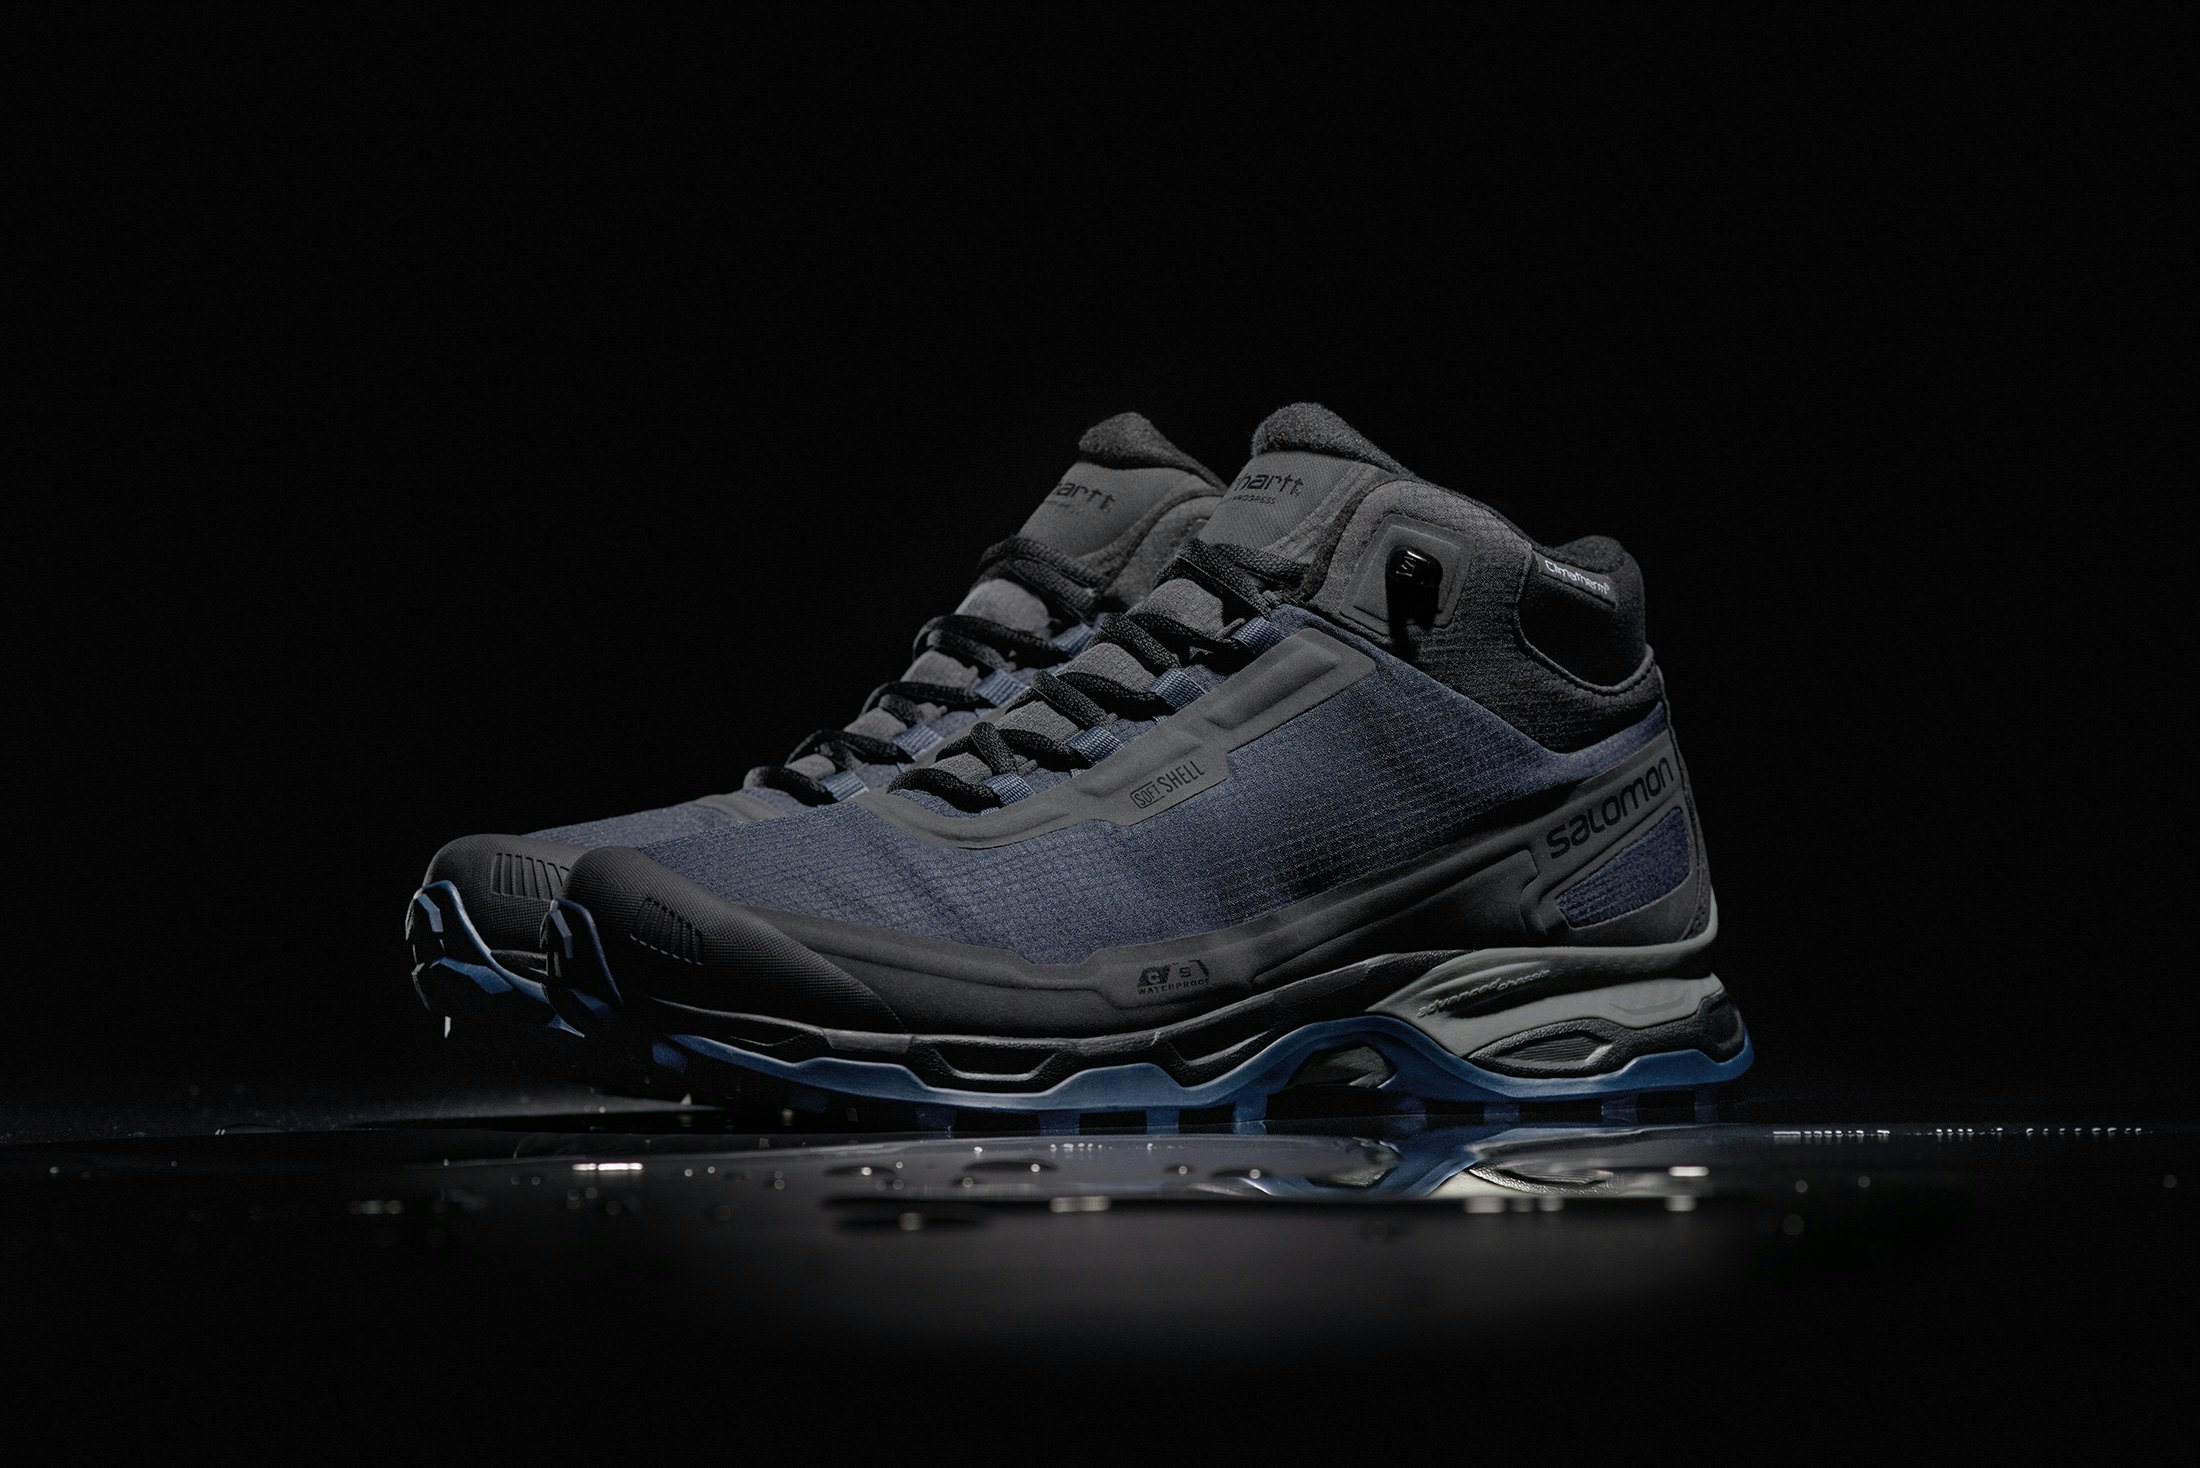 Carhartt WIP and Salomon made the waterproof boot of your dreams